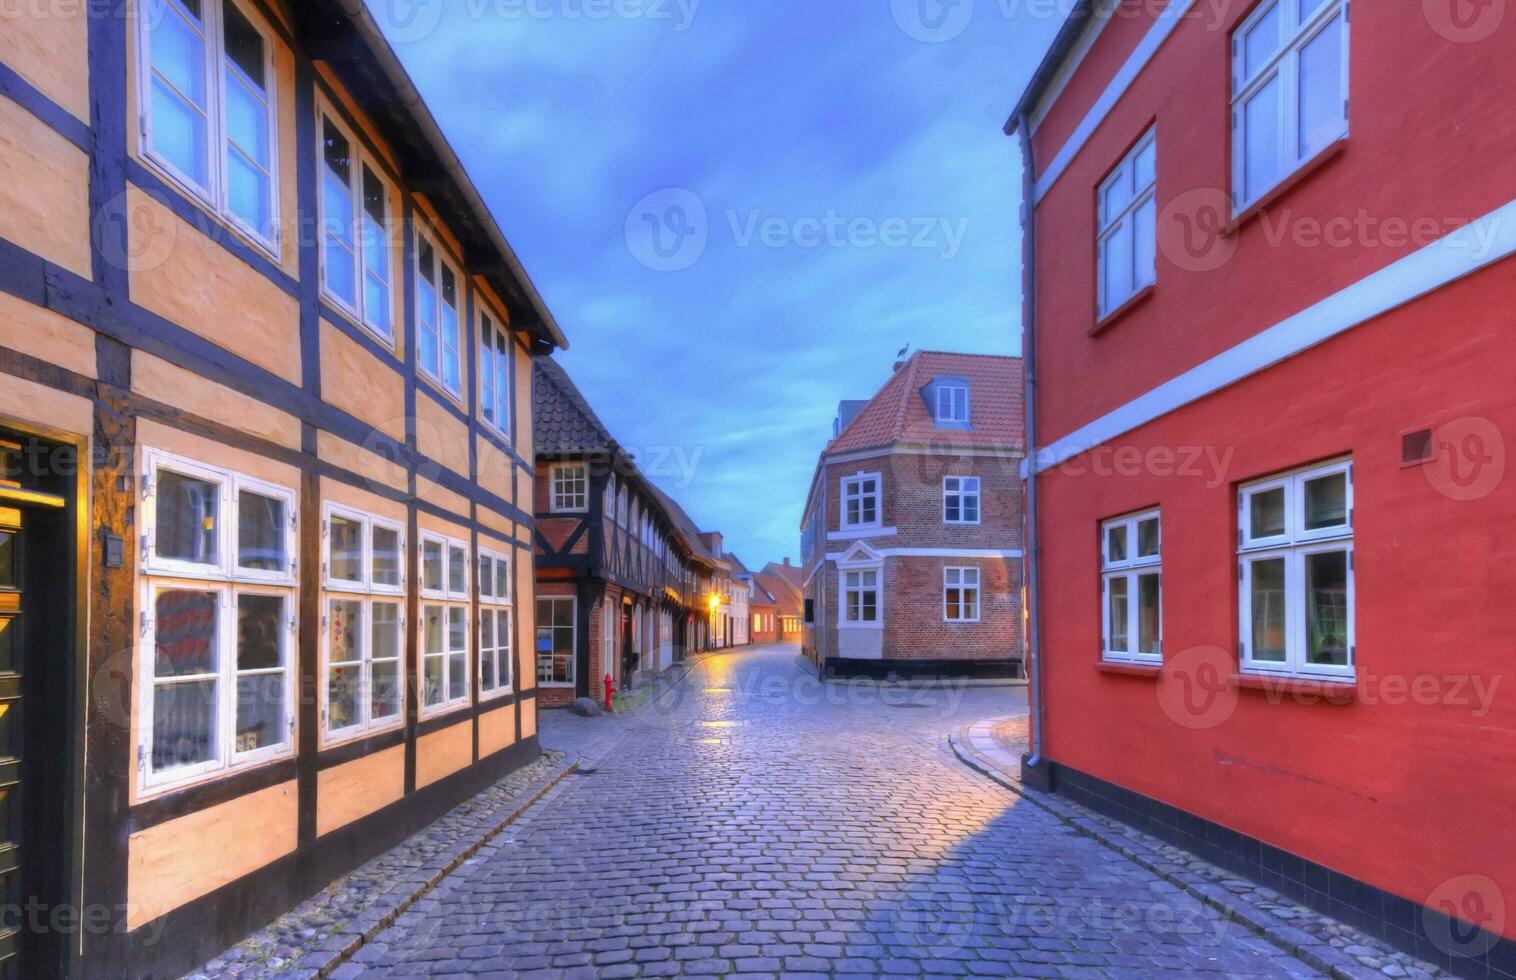 Street in medieval city of Ribe, Denmark - HDR photo